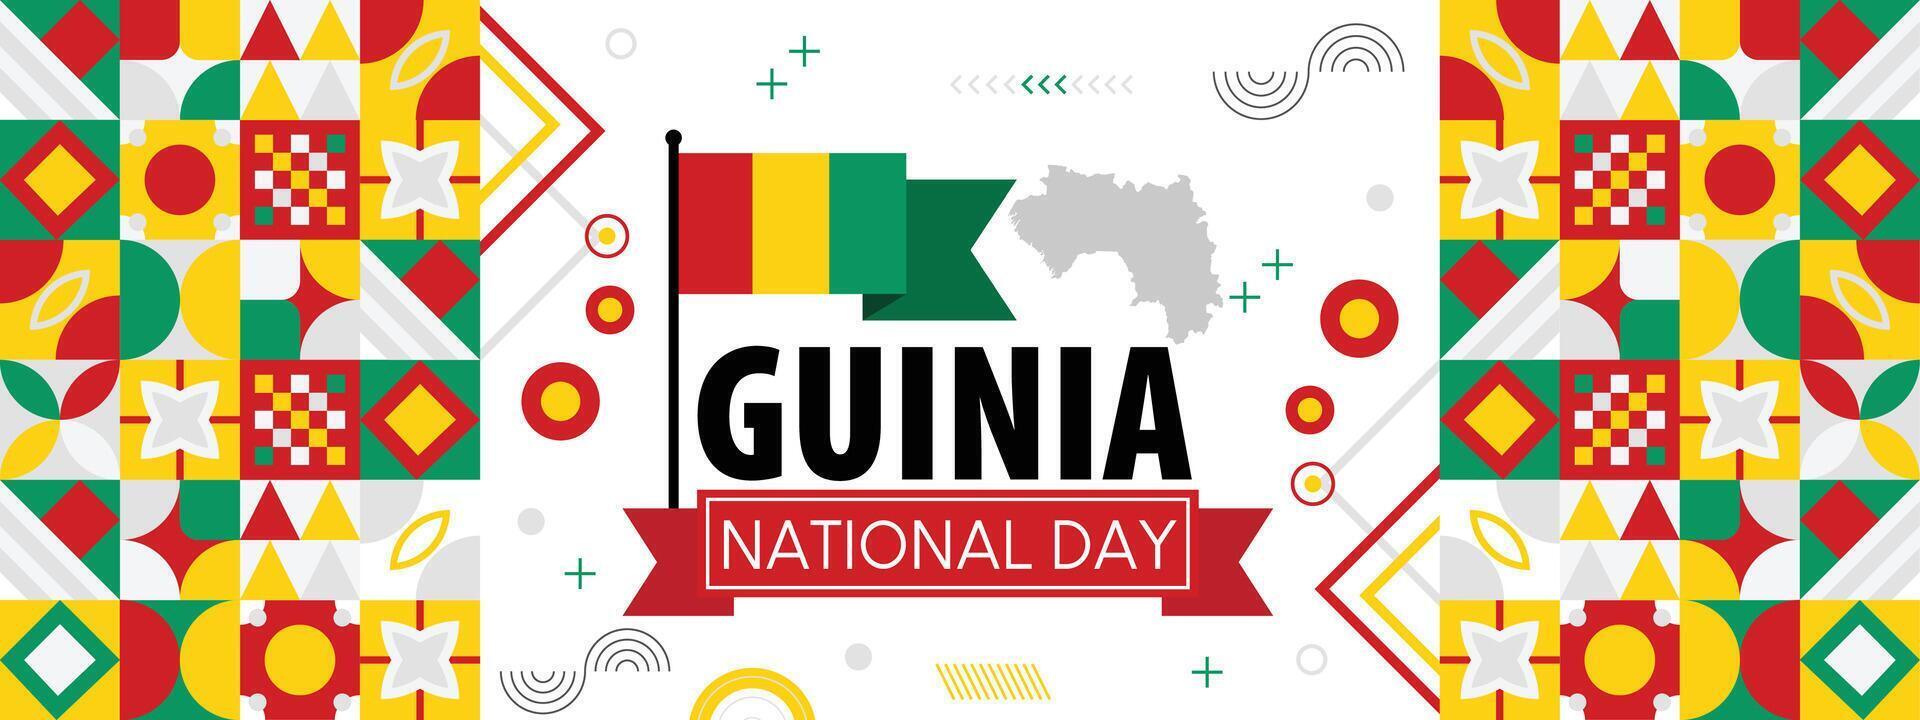 Guinea national or independence day banner for country celebration. Flag and map of Guinea. Modern retro design with typorgaphy abstract geometric icons. vector